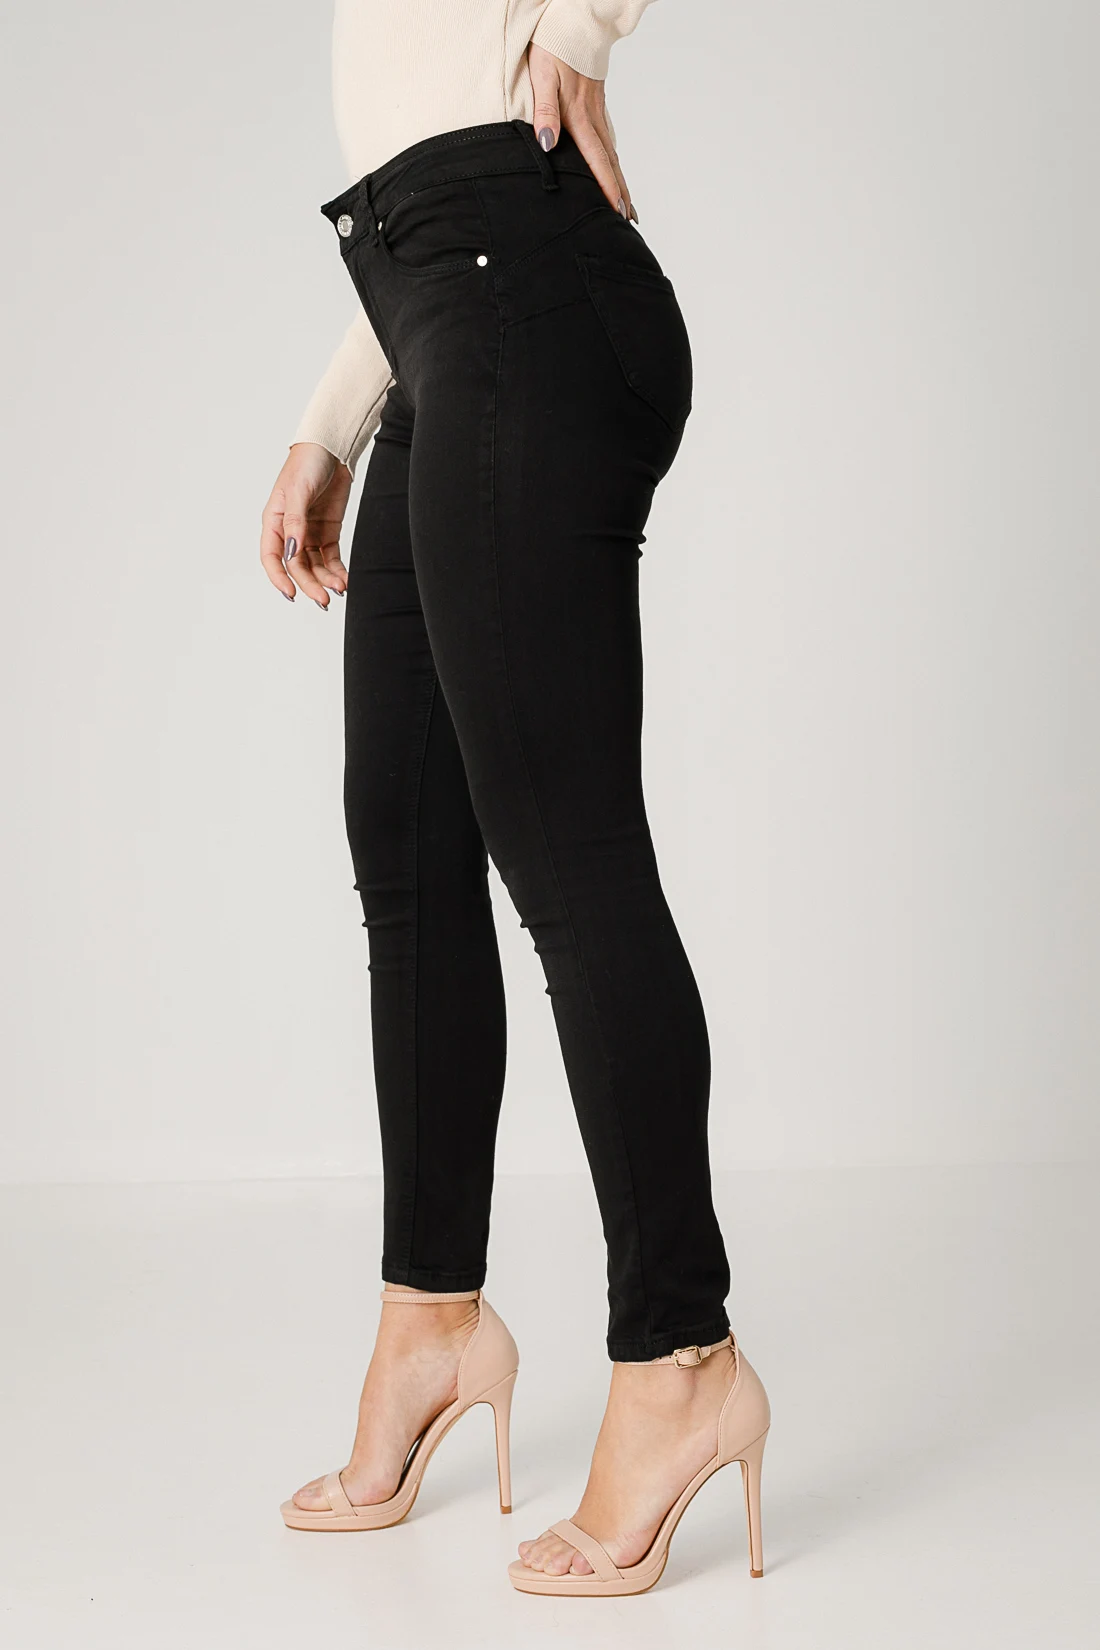 AINE TROUSERS - BLACK